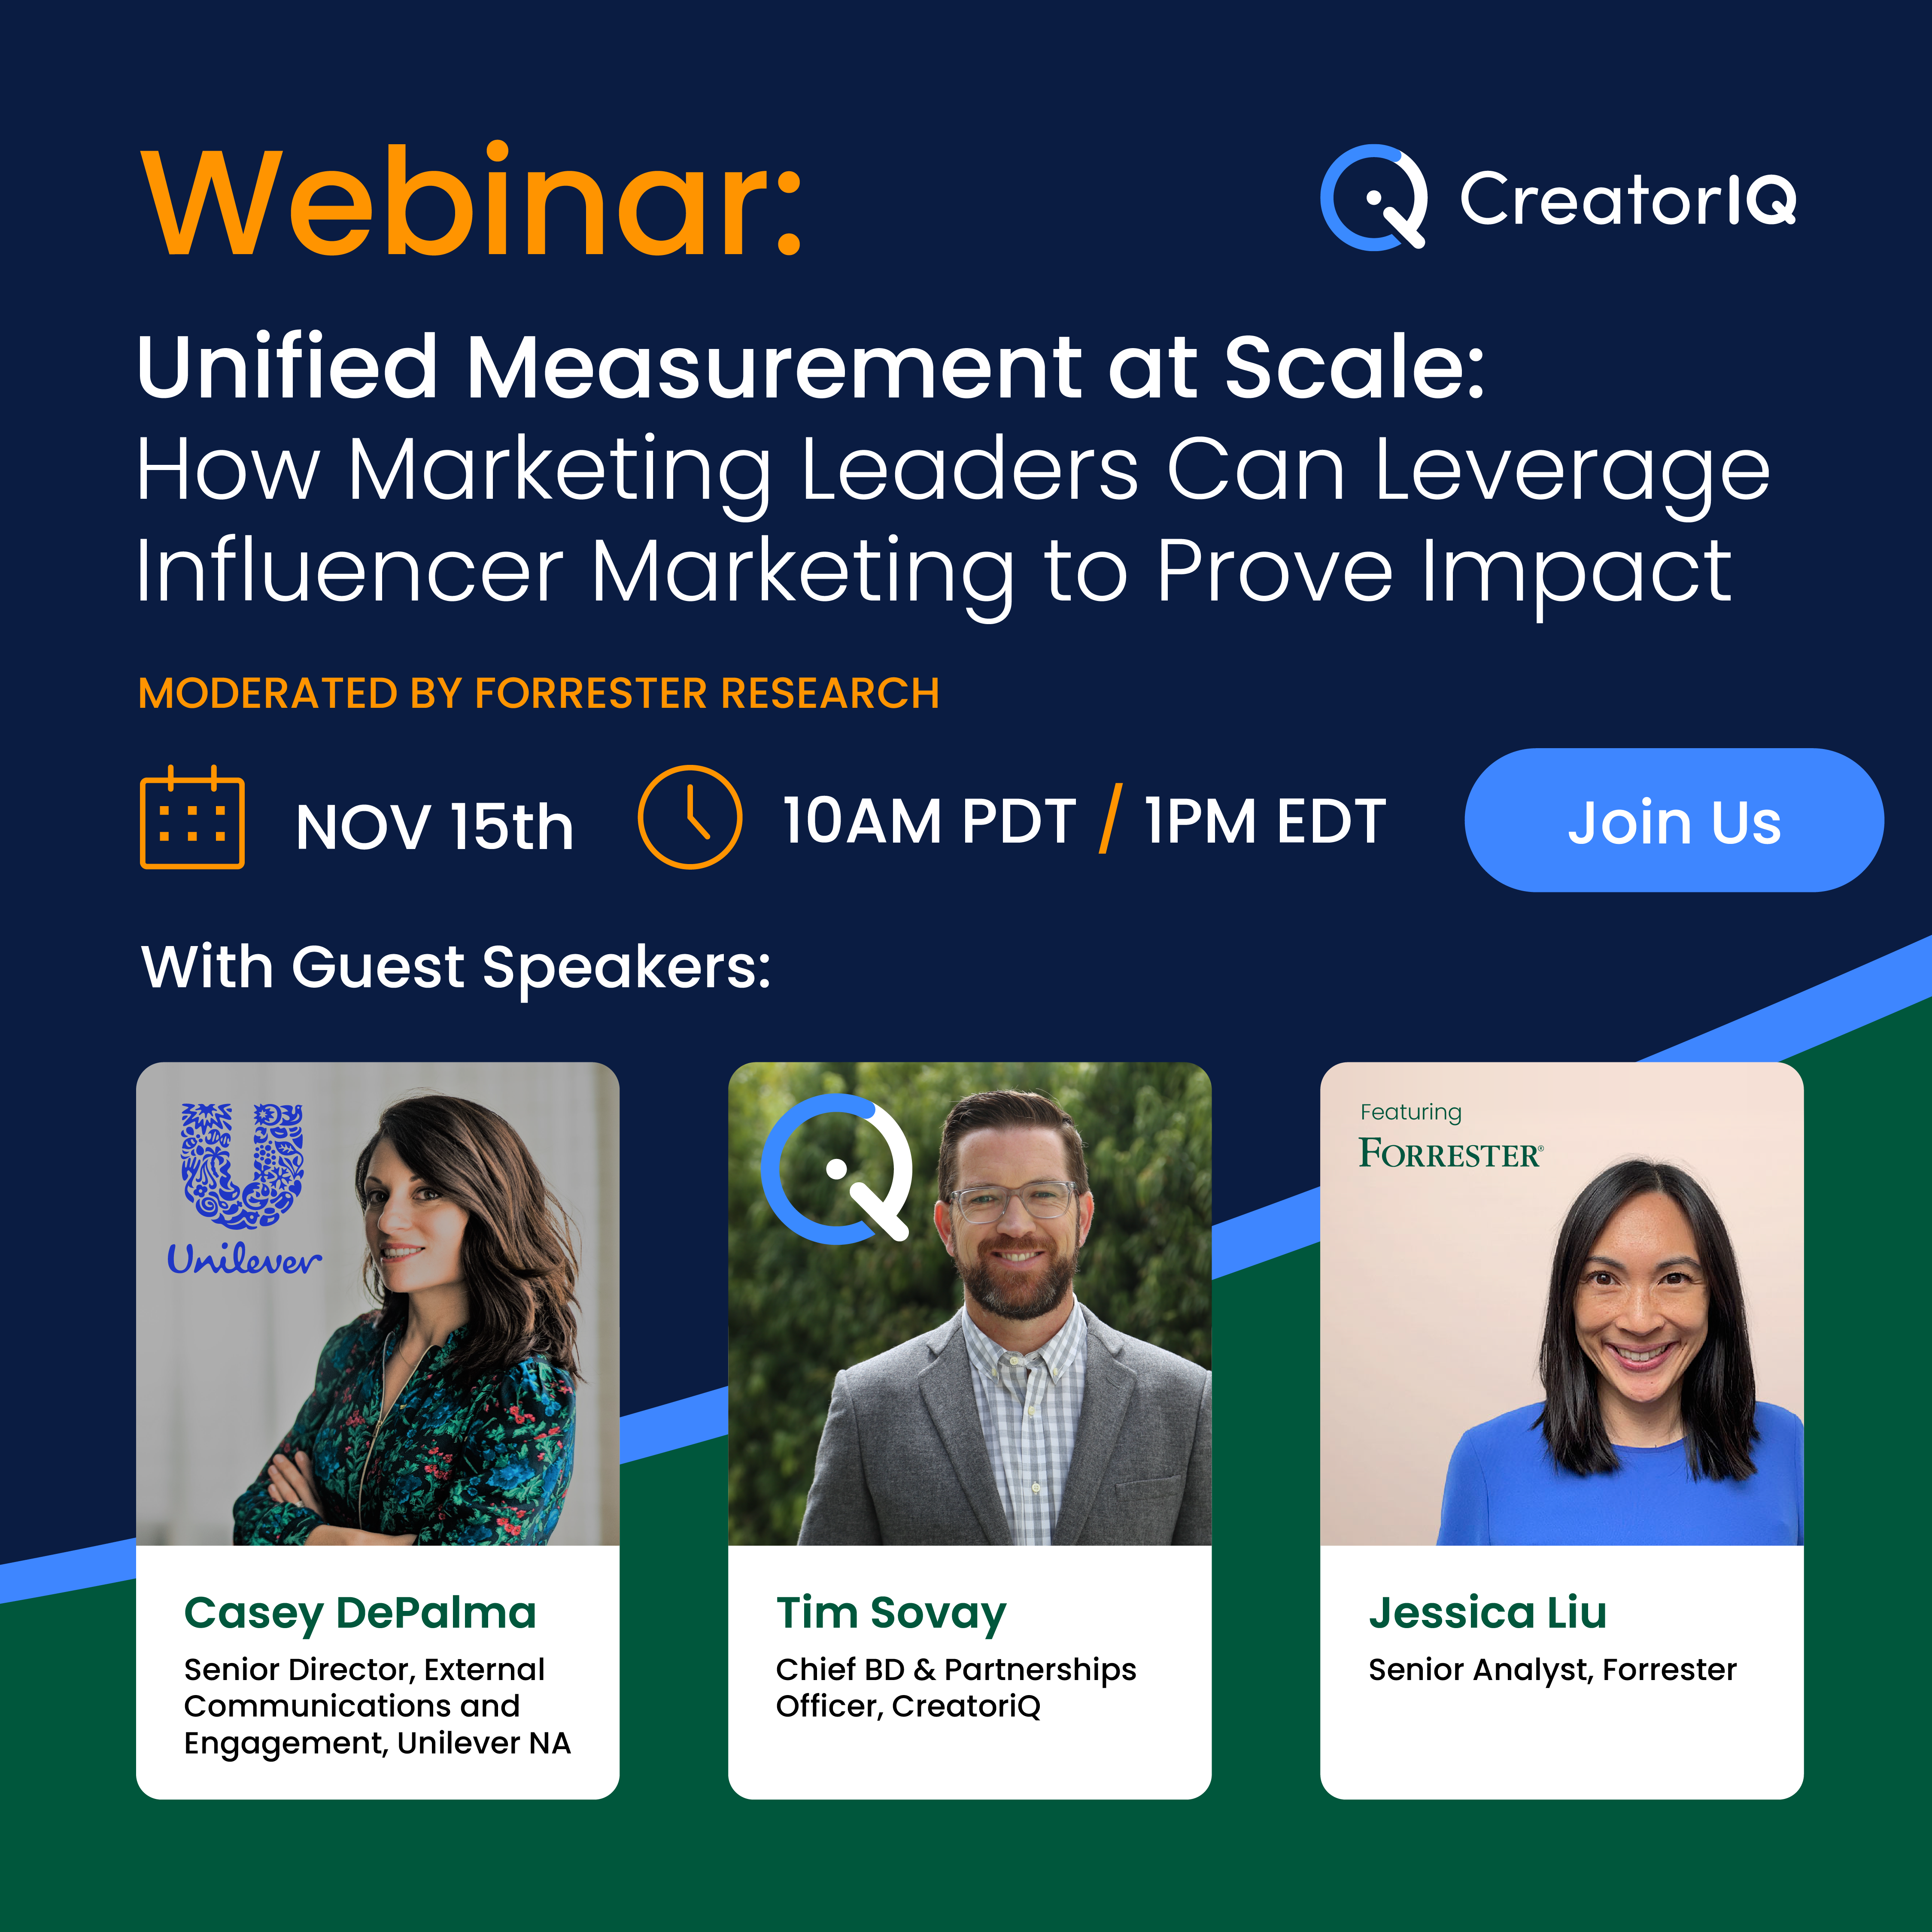 Unified Measurement at Scale: How Marketing Leaders Can Leverage Influencer Marketing to Prove Impact